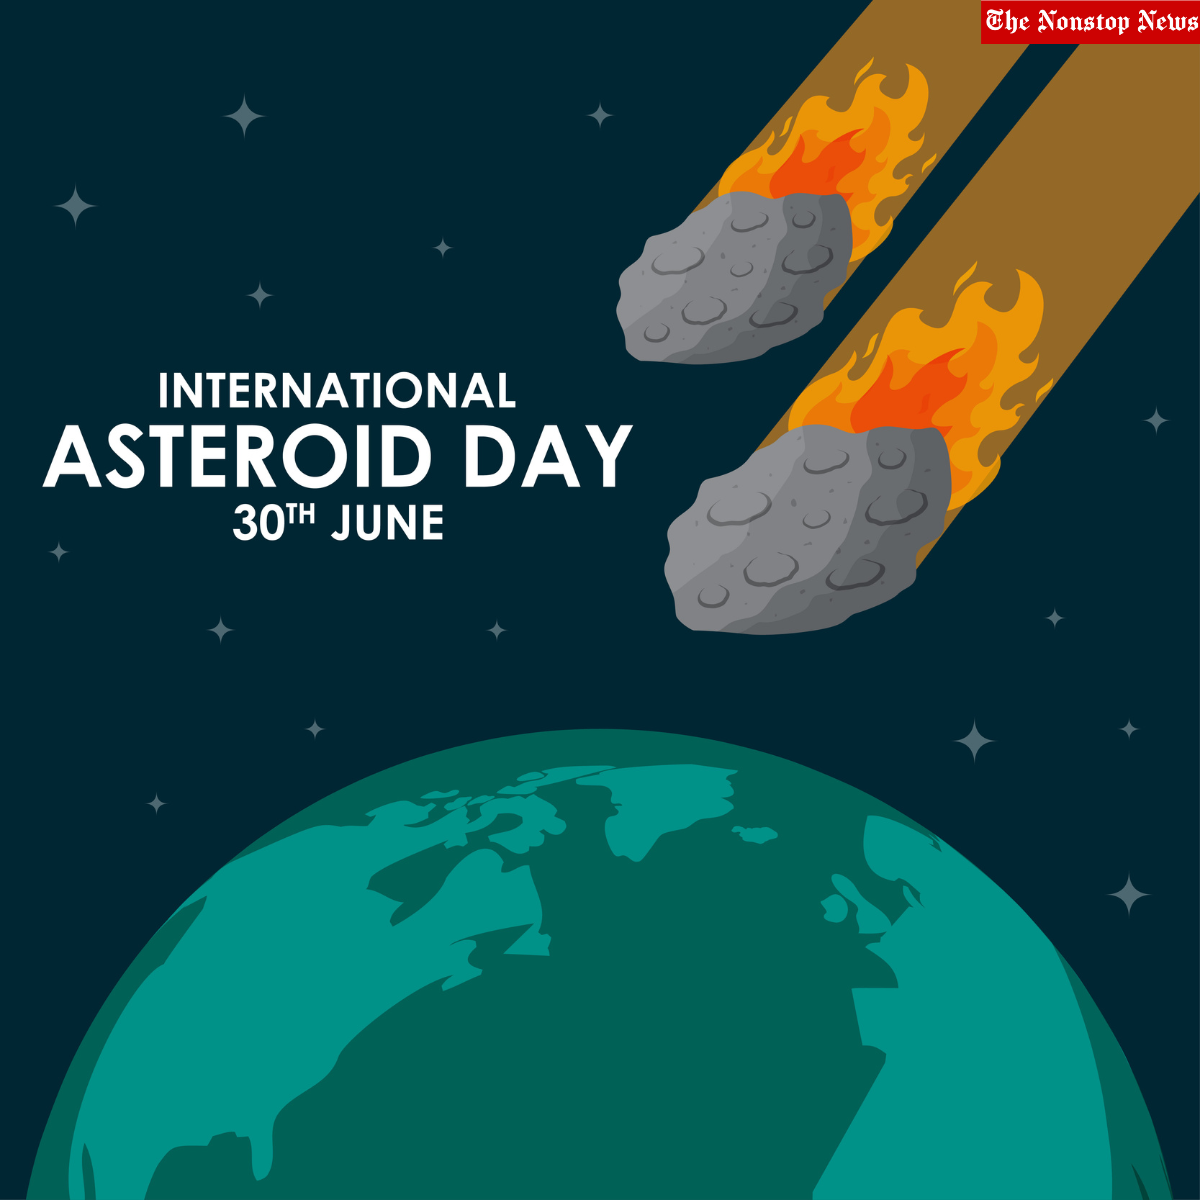 International Asteroid Day 2022 Theme, Quotes, Images, Messages To Share